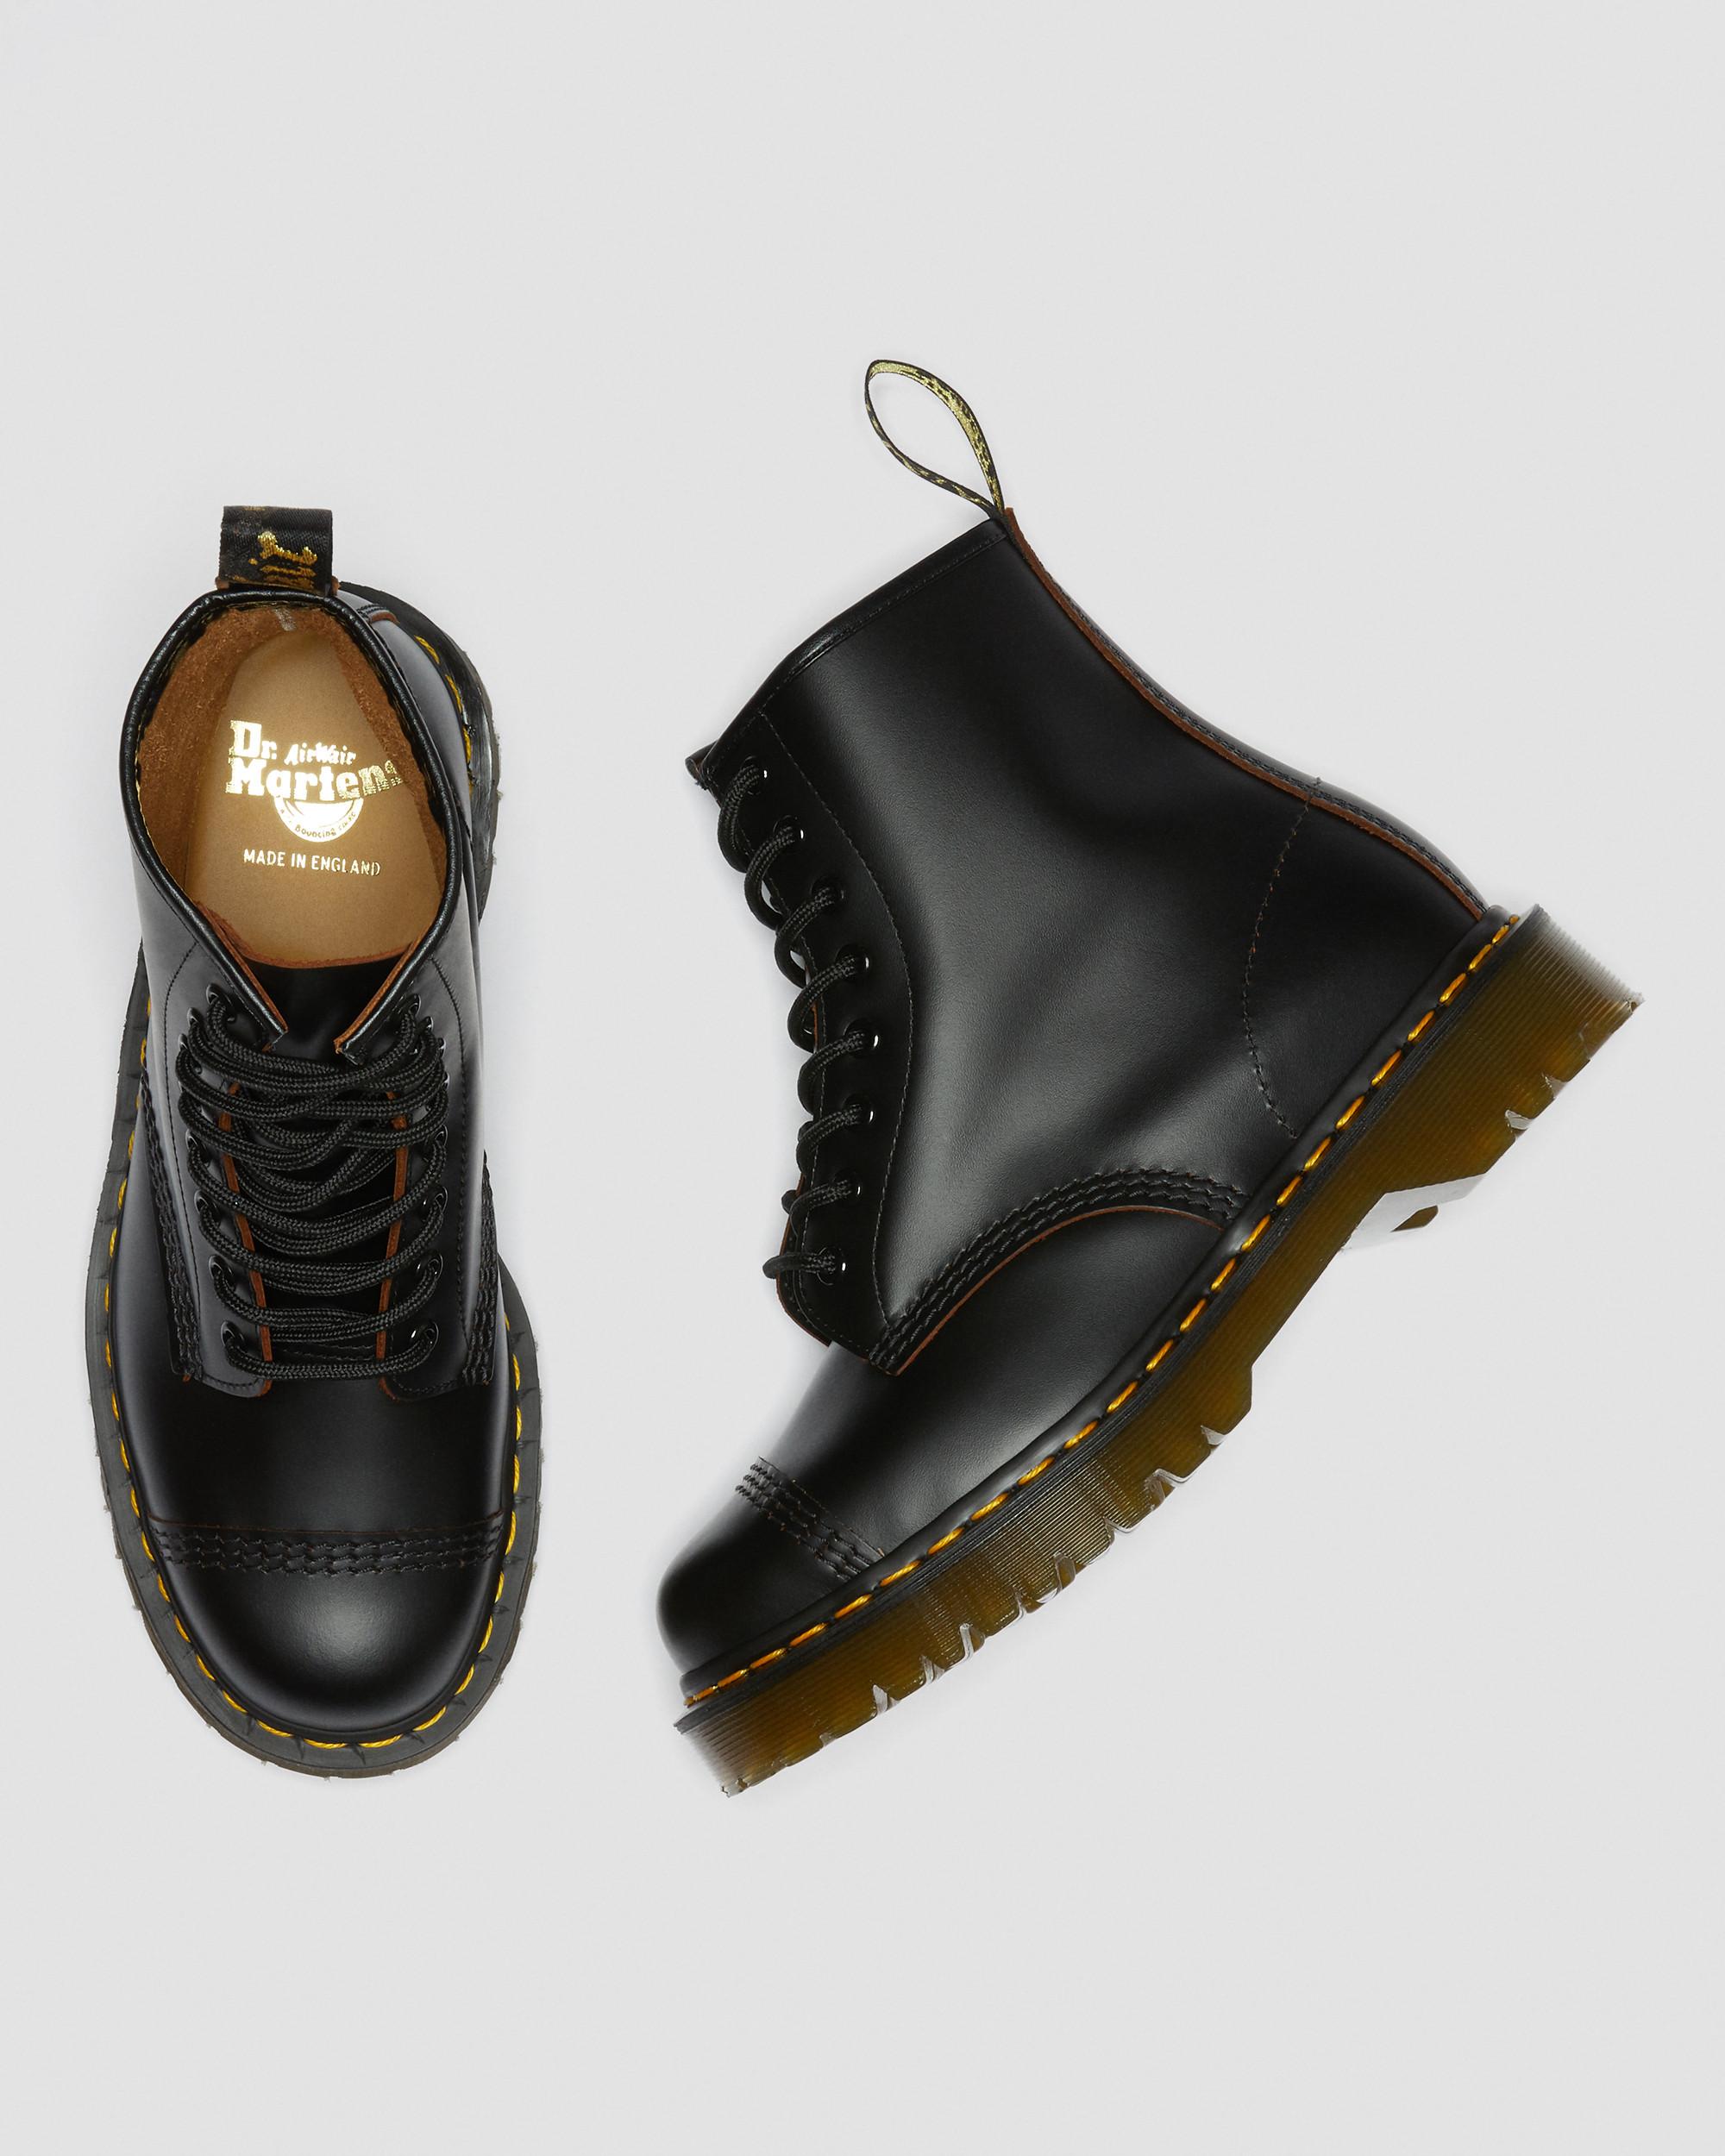 1460 Bex Made in England Toe Cap Lace Up Boots, Black | Dr. Martens